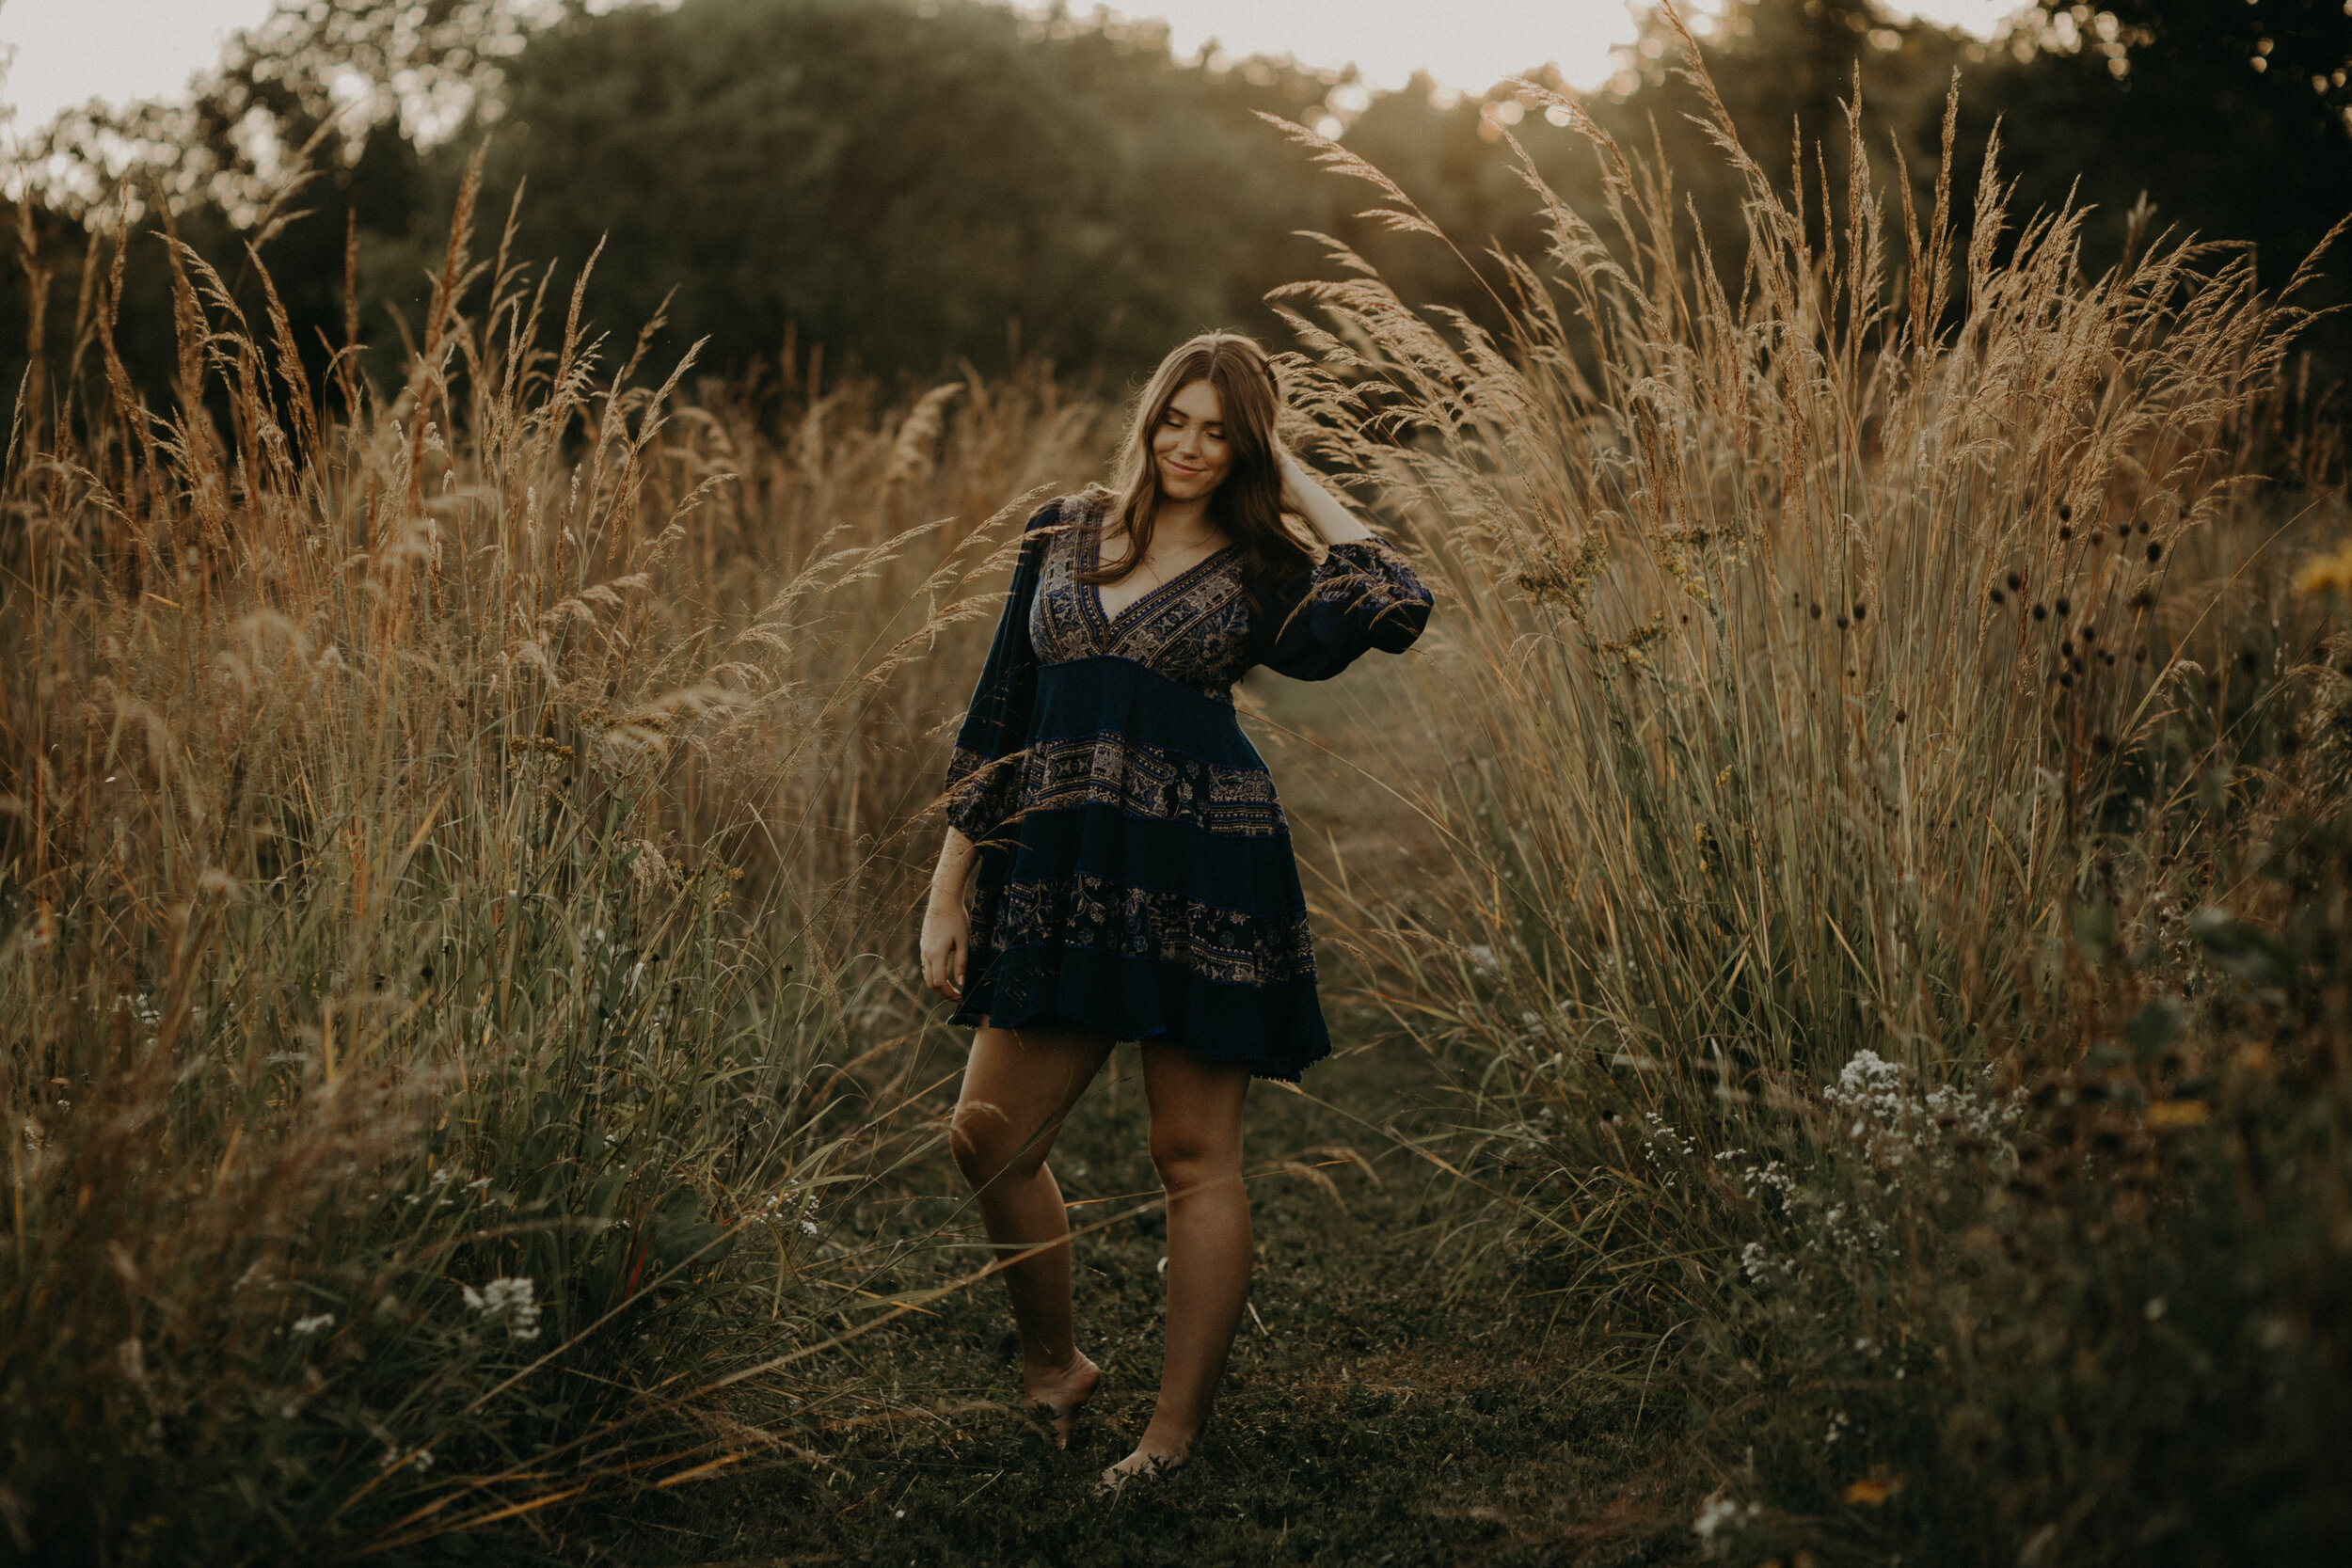  pappas grass in Hudson WI for senior photos while Carly wears Free People dress 